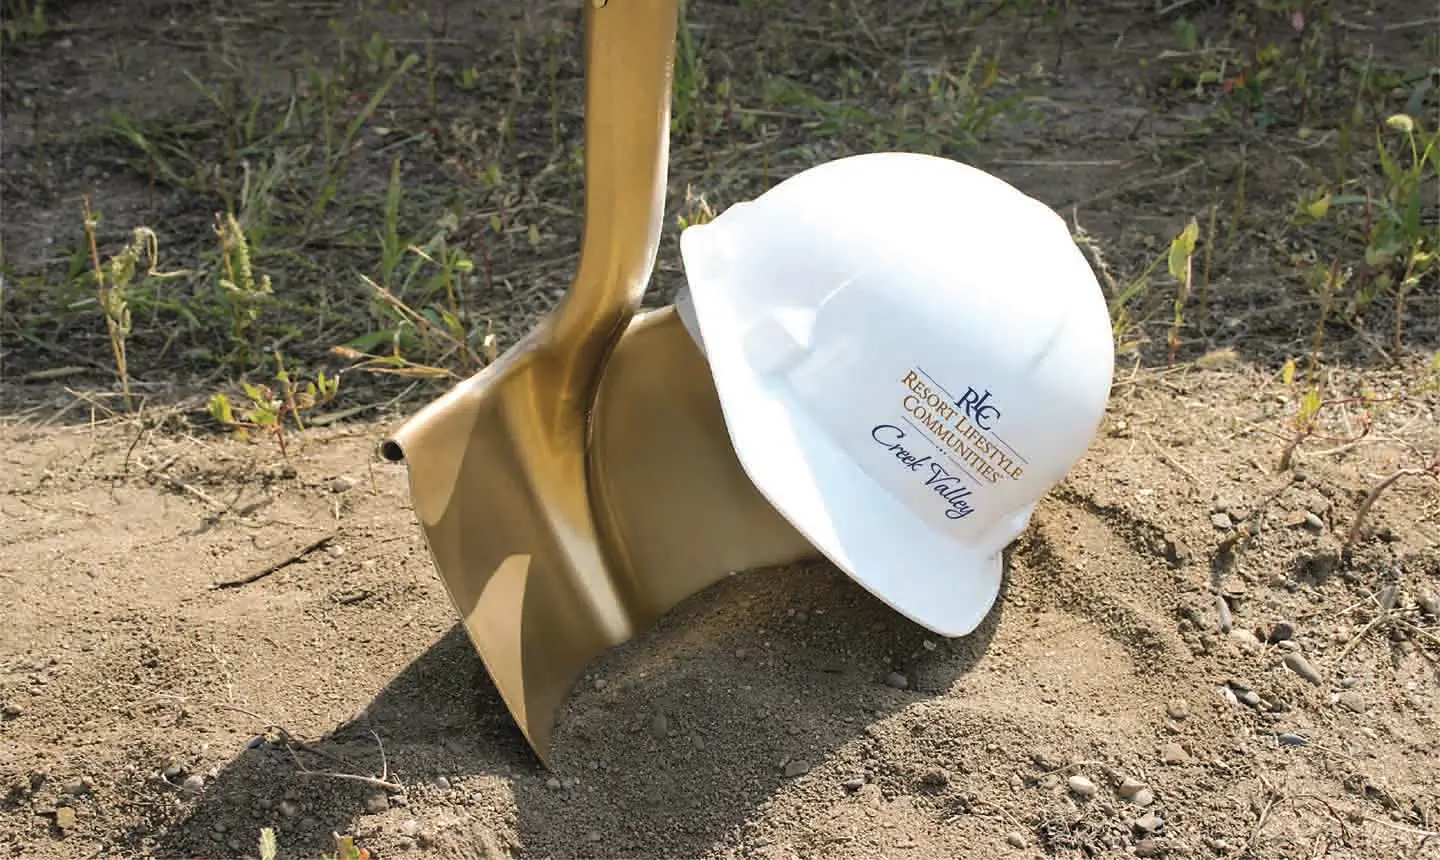 Golden shovel and Resort Lifestyle Communities hard hat to represent the construction being done at Creek Valley